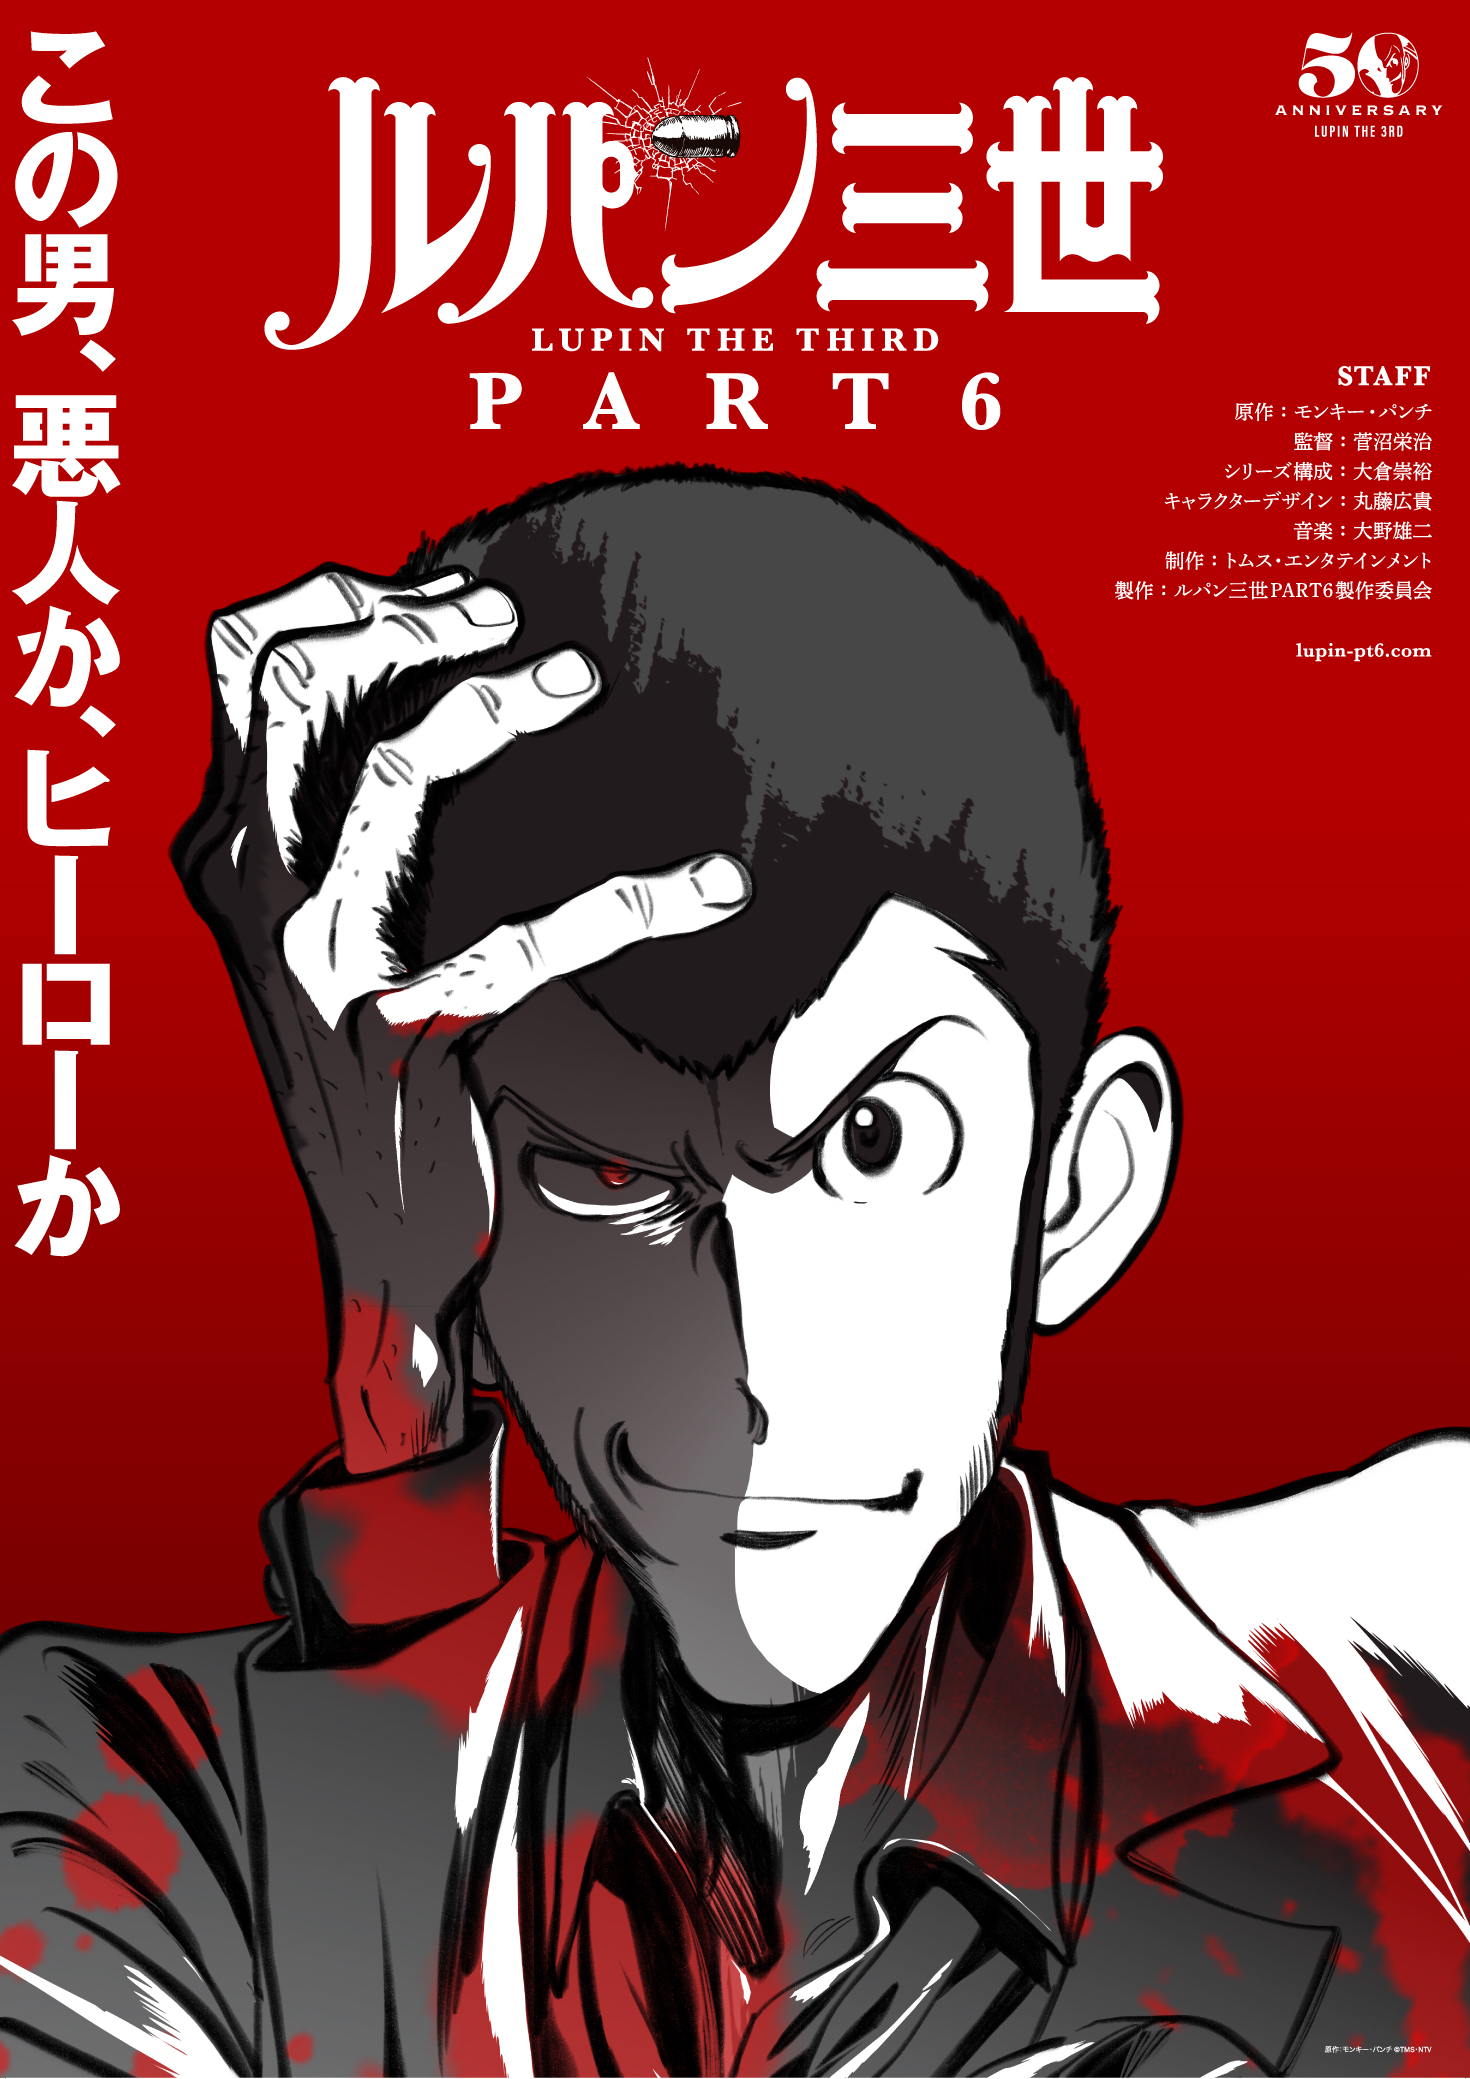 lupin-the-third-part6-kv Lupin III: Part 6 (LUPIN THE 3rd PART 6)